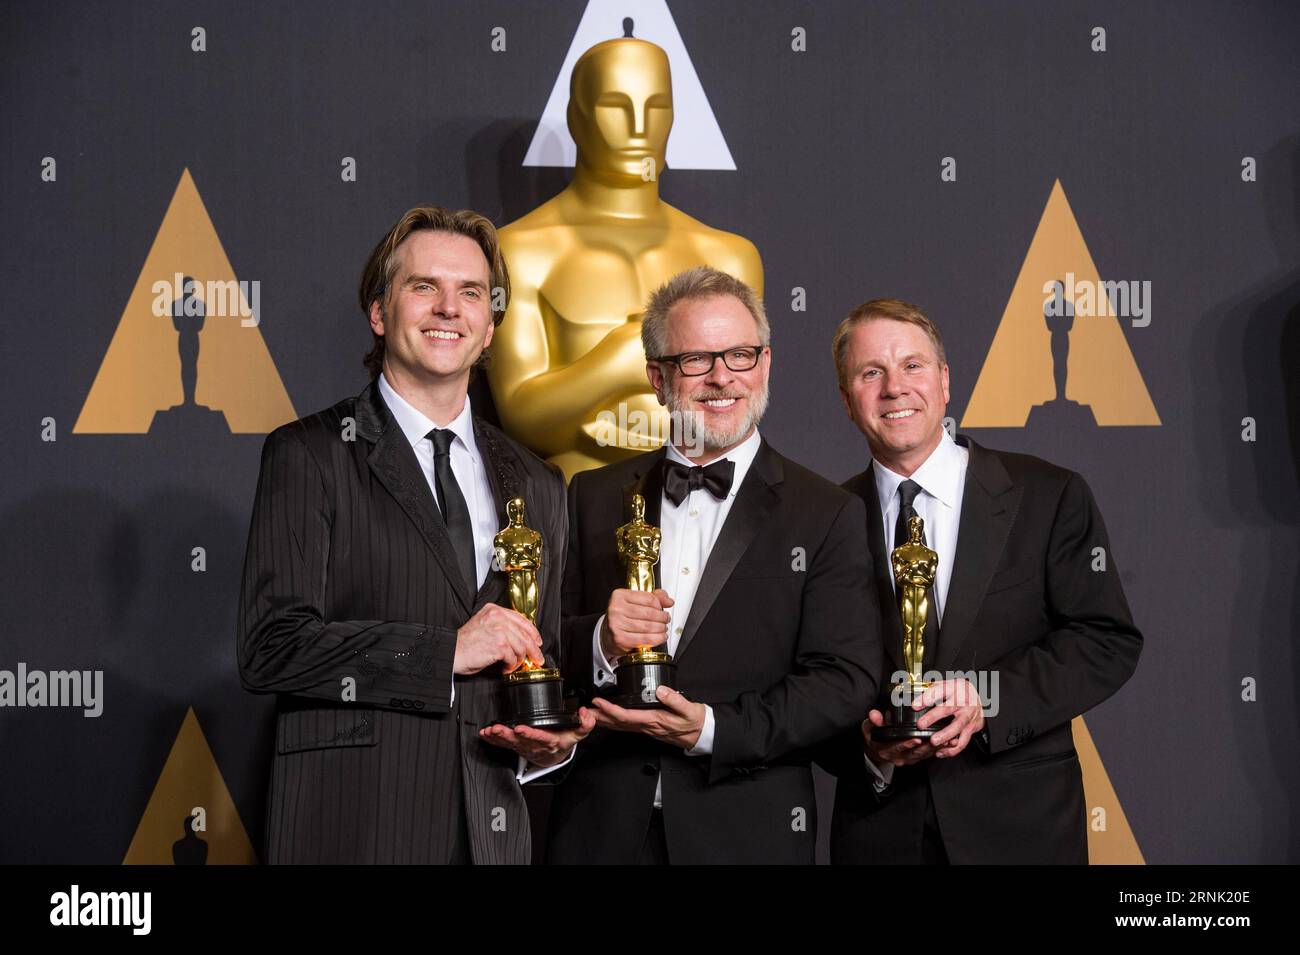 (L-R) Co-directors Byron Howard and Rich Moore and producer Clark Spencer, winners of Best Animated Feature Film Zootopia , pose at press room of the 89th Academy Awards at the Dolby Theater in Los Angeles, the United States, on Feb. 26, 2017. ) (zjy) U.S.-LOS ANGELES-OSCAR-AWARD YangxLei PUBLICATIONxNOTxINxCHN   l r Co Directors Byron Howard and Rich Moore and Producer Clark Spencer winners of Best Animated Feature Film Zootopia Pose AT Press Room of The 89th Academy Awards AT The Dolby Theatre in Los Angeles The United States ON Feb 26 2017 zjy U S Los Angeles Oscar Award YangxLei PUBLICATIO Stock Photo